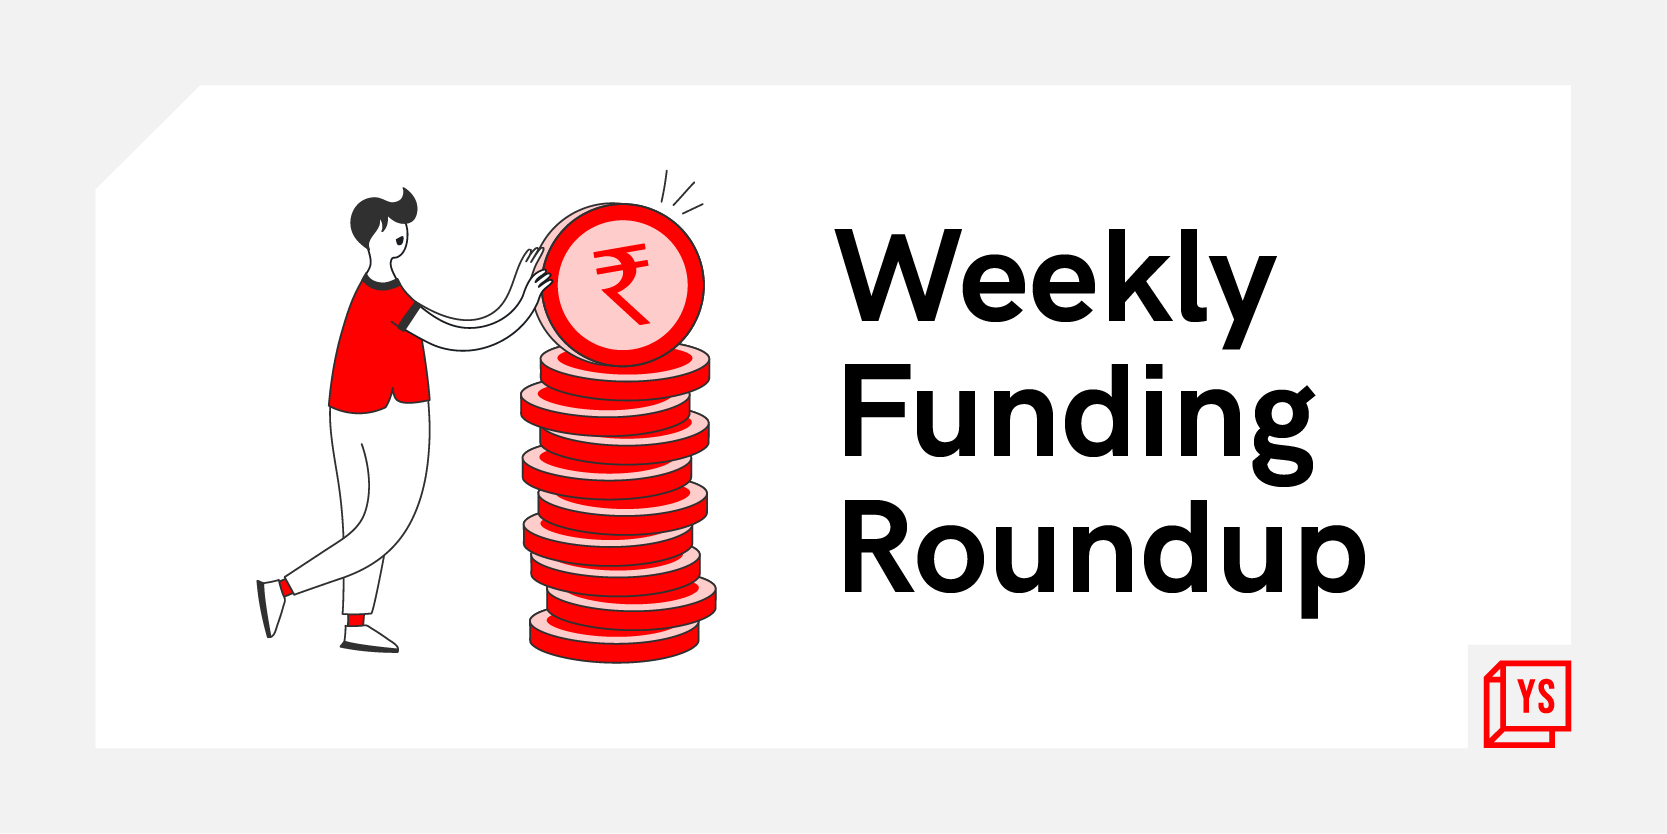 [Weekly funding roundup June 13-17] Venture capital flow maintains strong traction